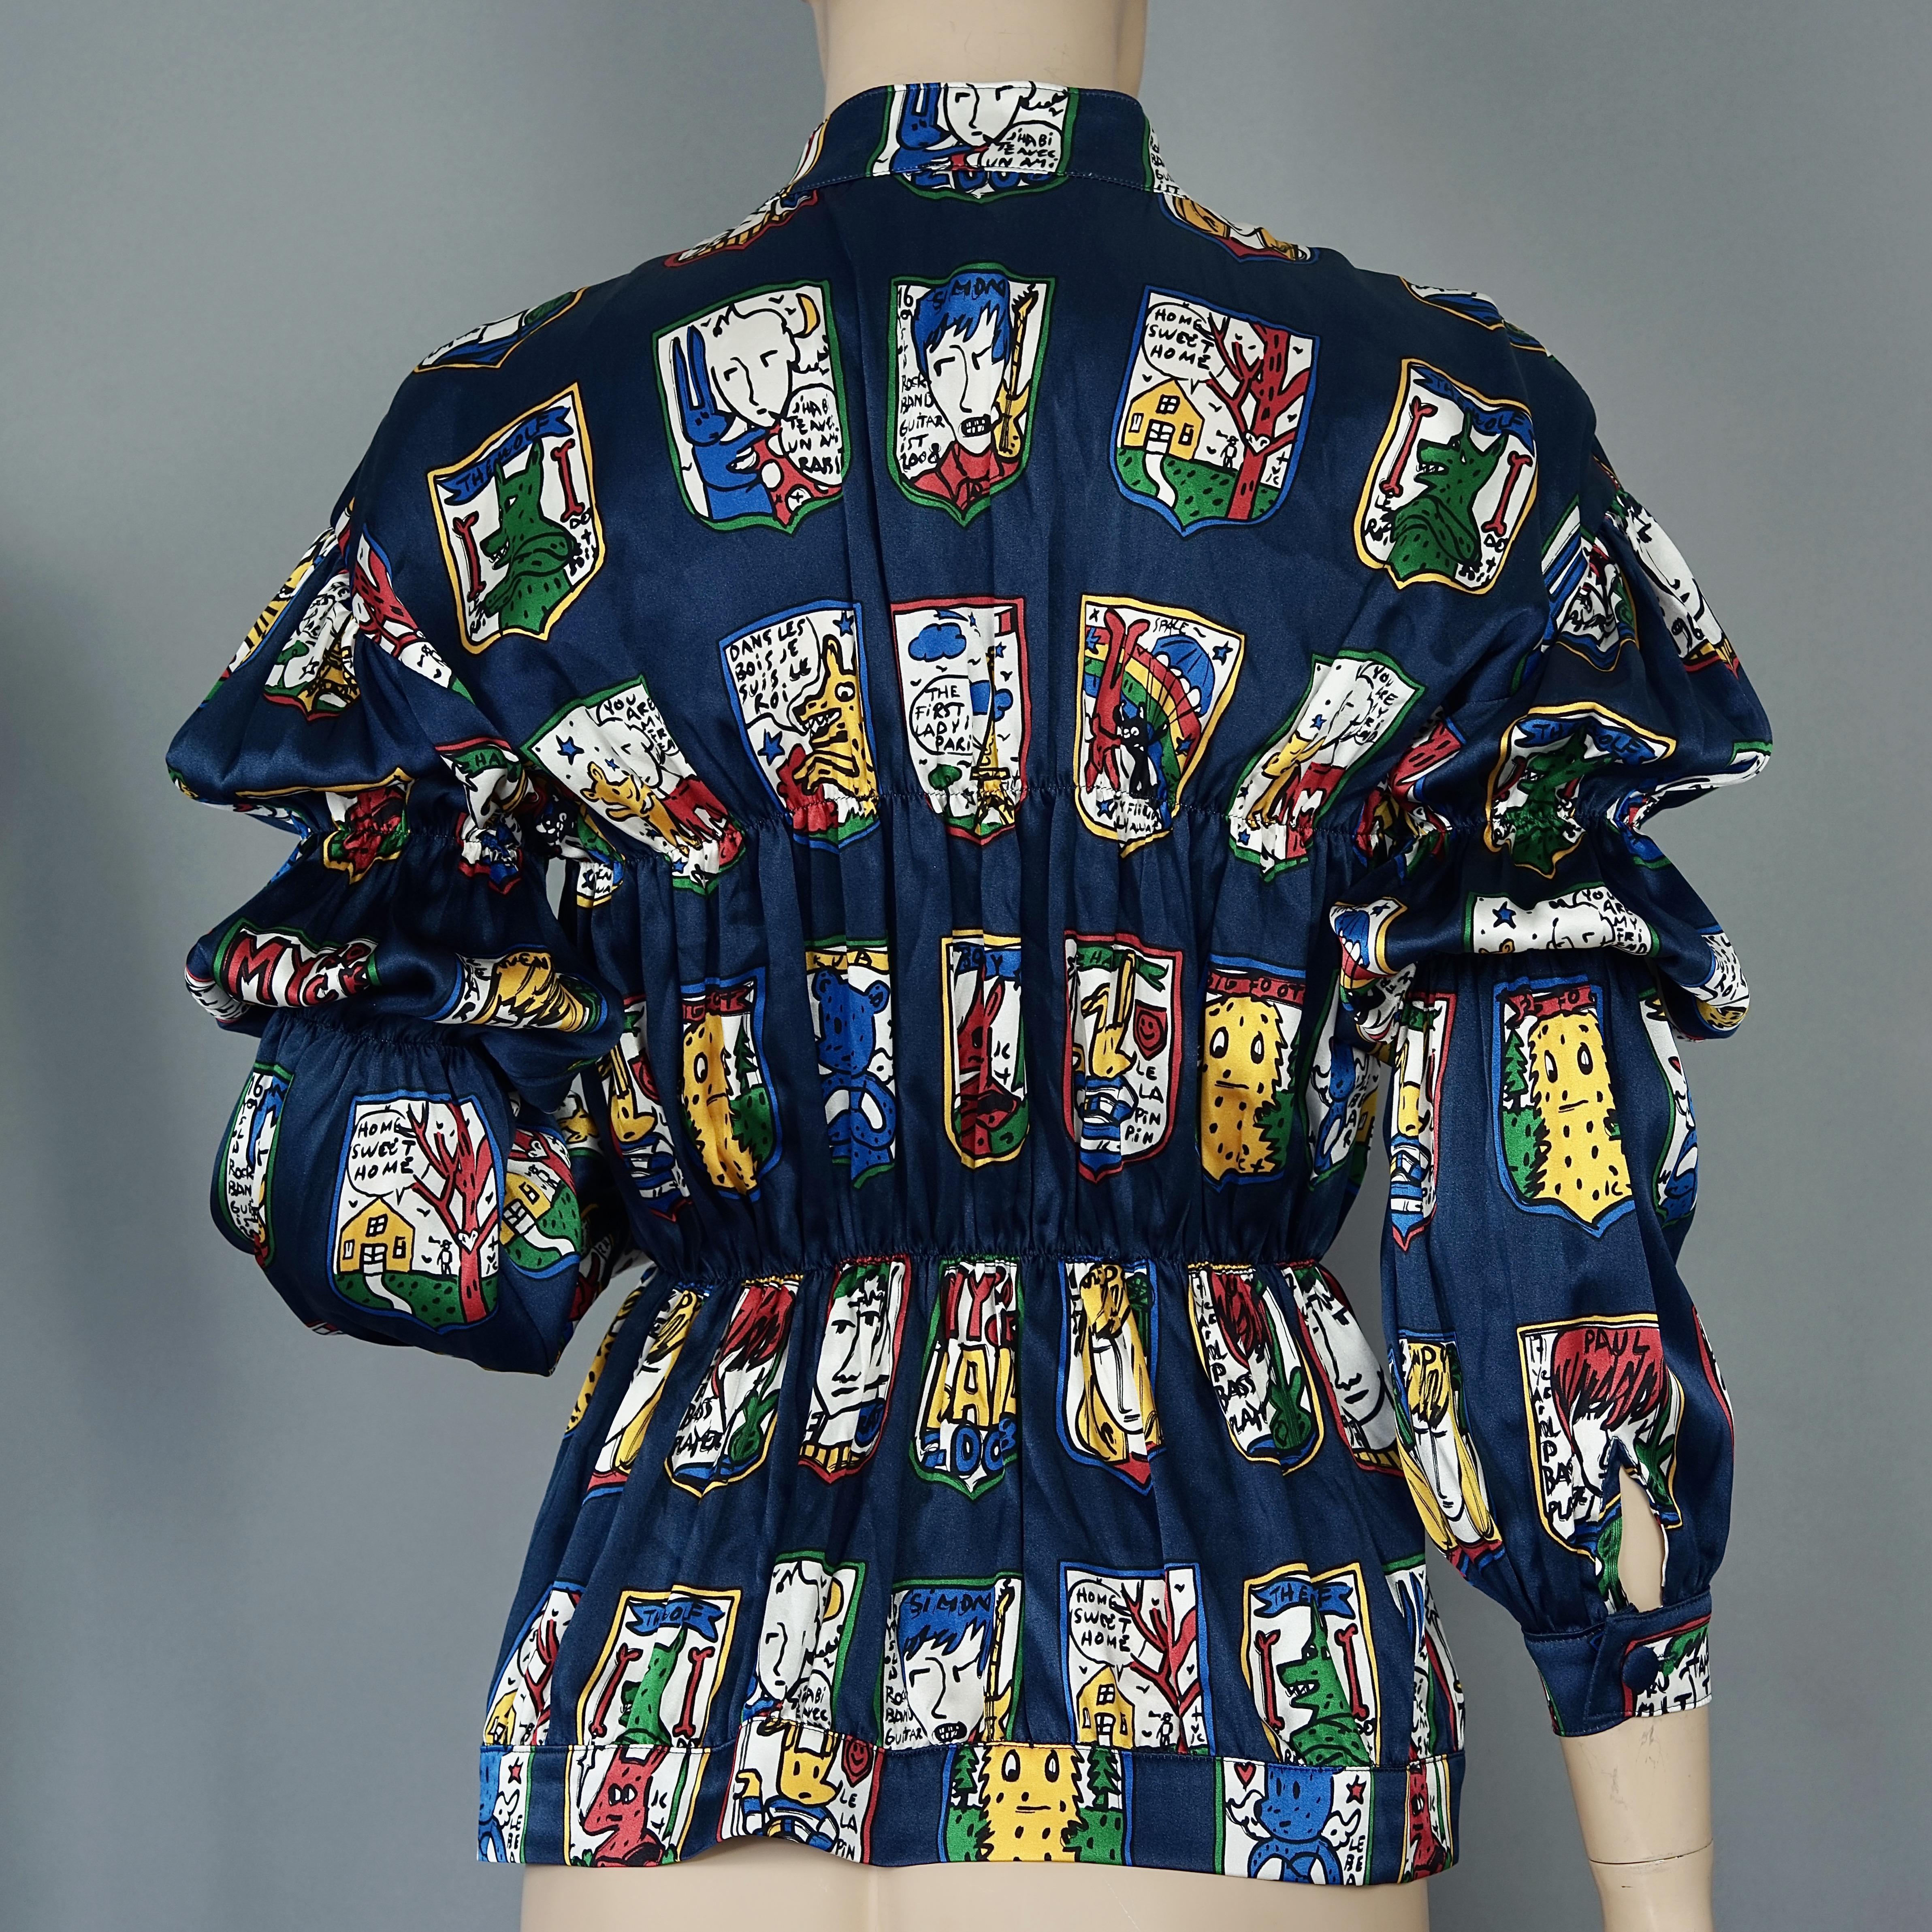 JEANS CHARLES de CASTELBAJAC Pop Art Post Cards Silk Shirt Blouse

Measurements taken laid flat, please double bust and waist:
Shoulder: 19.29 inches (49 cm)
Sleeves: 21.26 inches (54 cm) 
Bust: 13.78 inches (35 cm) without stretching
Waist: 11.81